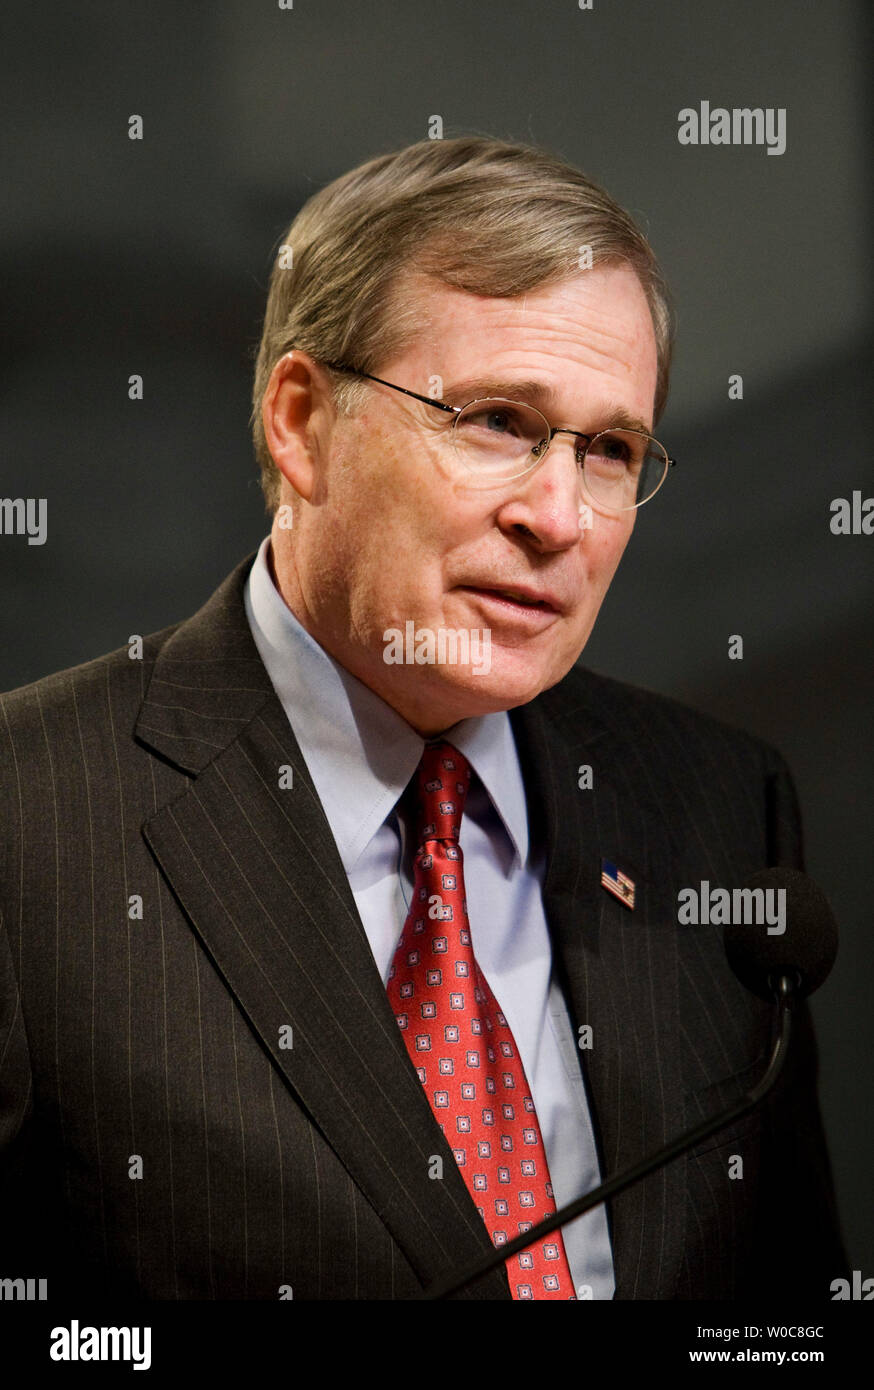 Stephen J. Hadley, National Security Advisor, speaks at the inauguration of the Kissinger Institute of China and the United States at the Woodrow Wilson Center in Washington on July 29, 2008. (UPI Photo/Patrick D. McDermott) Stock Photo